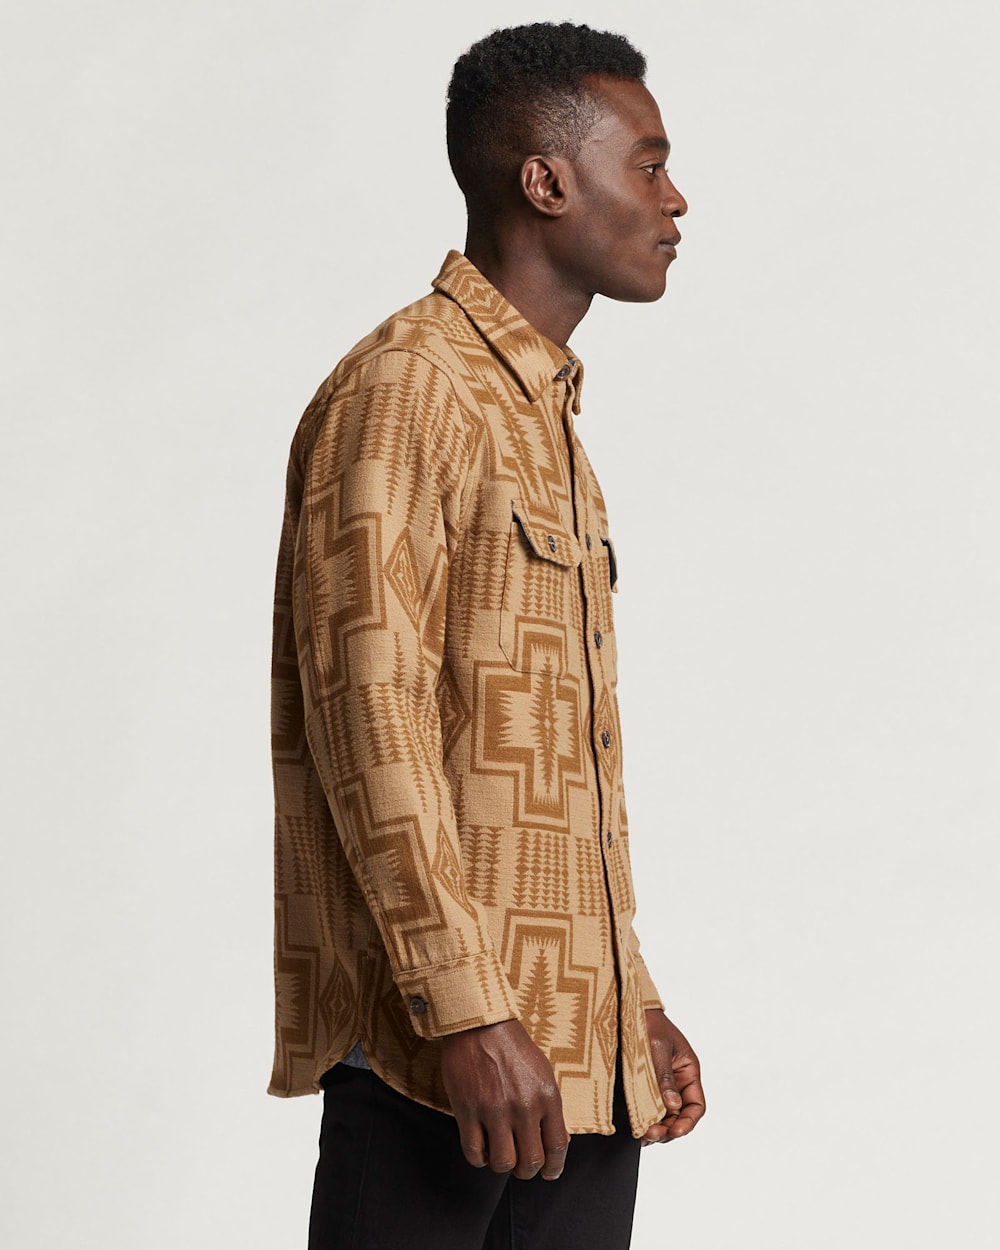 ALTERNATE VIEW OF MEN'S DOUBLESOFT DRIFTWOOD SHIRT IN TAN/BROWN HARDING image number 2